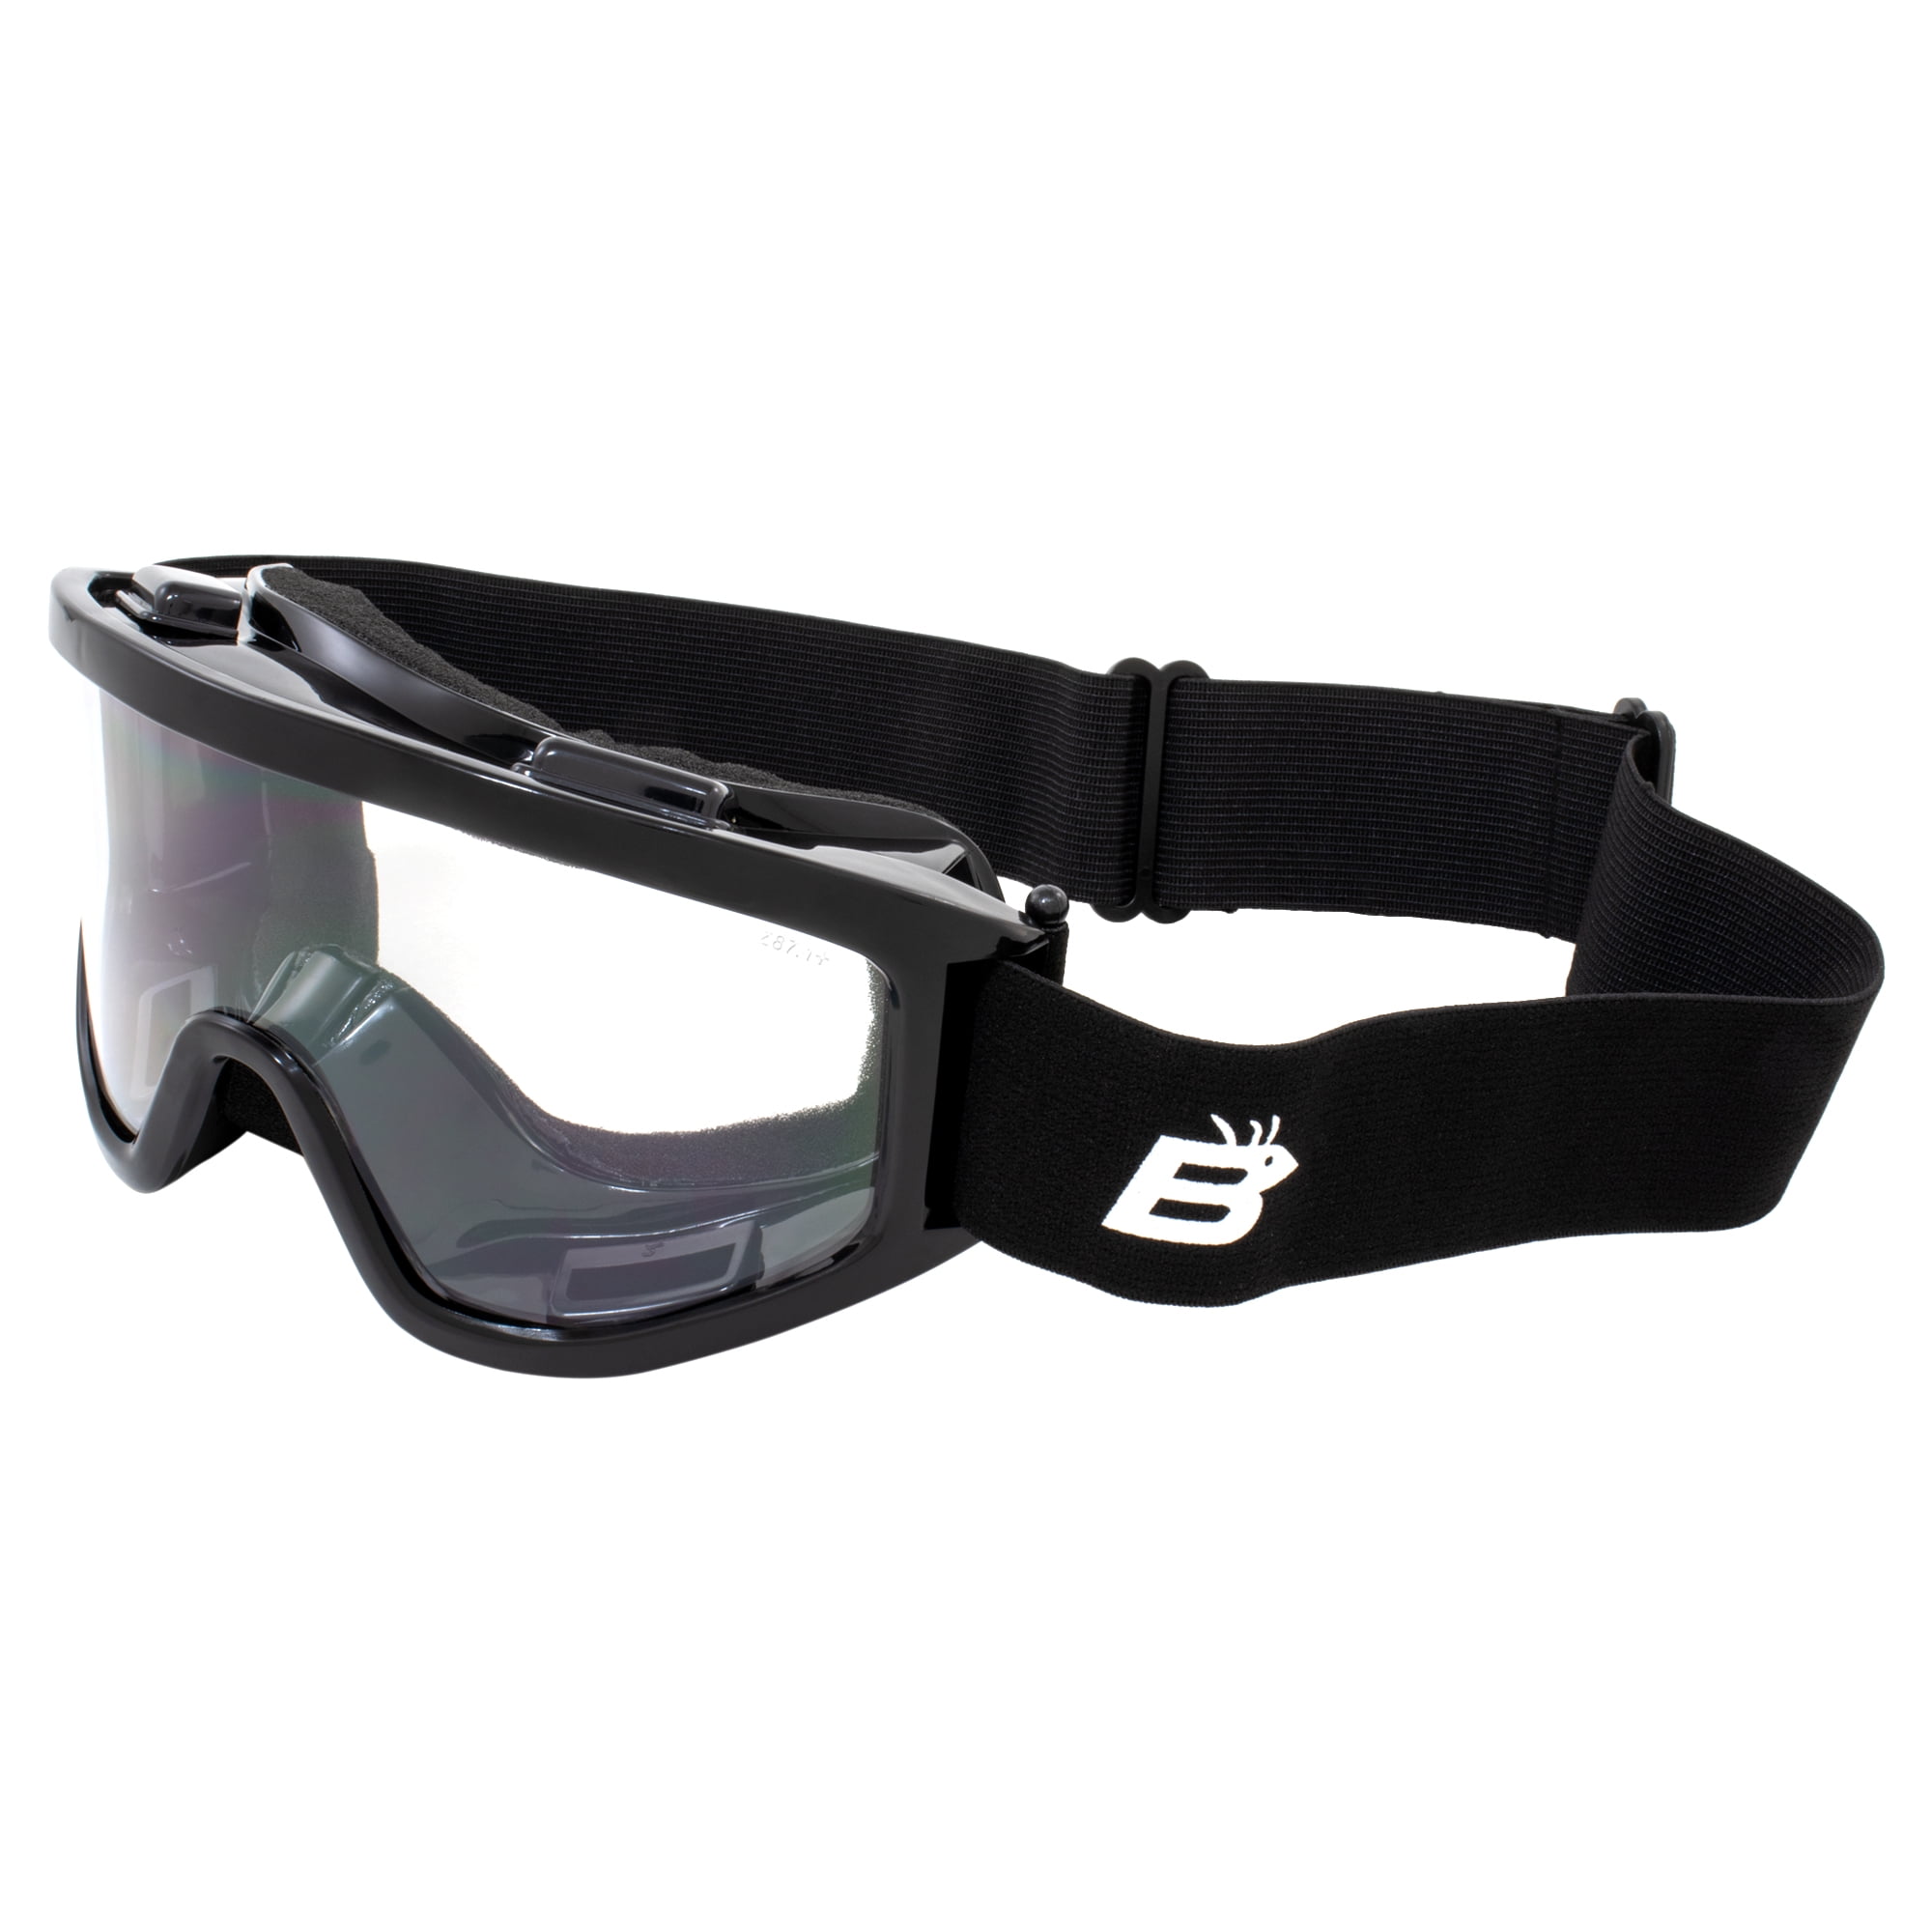 BLACK FRAME YOUTH TINTED GOGGLES MX MOTORCROSS OFFROAD KIDS GOGGLES EYE SAFETY 